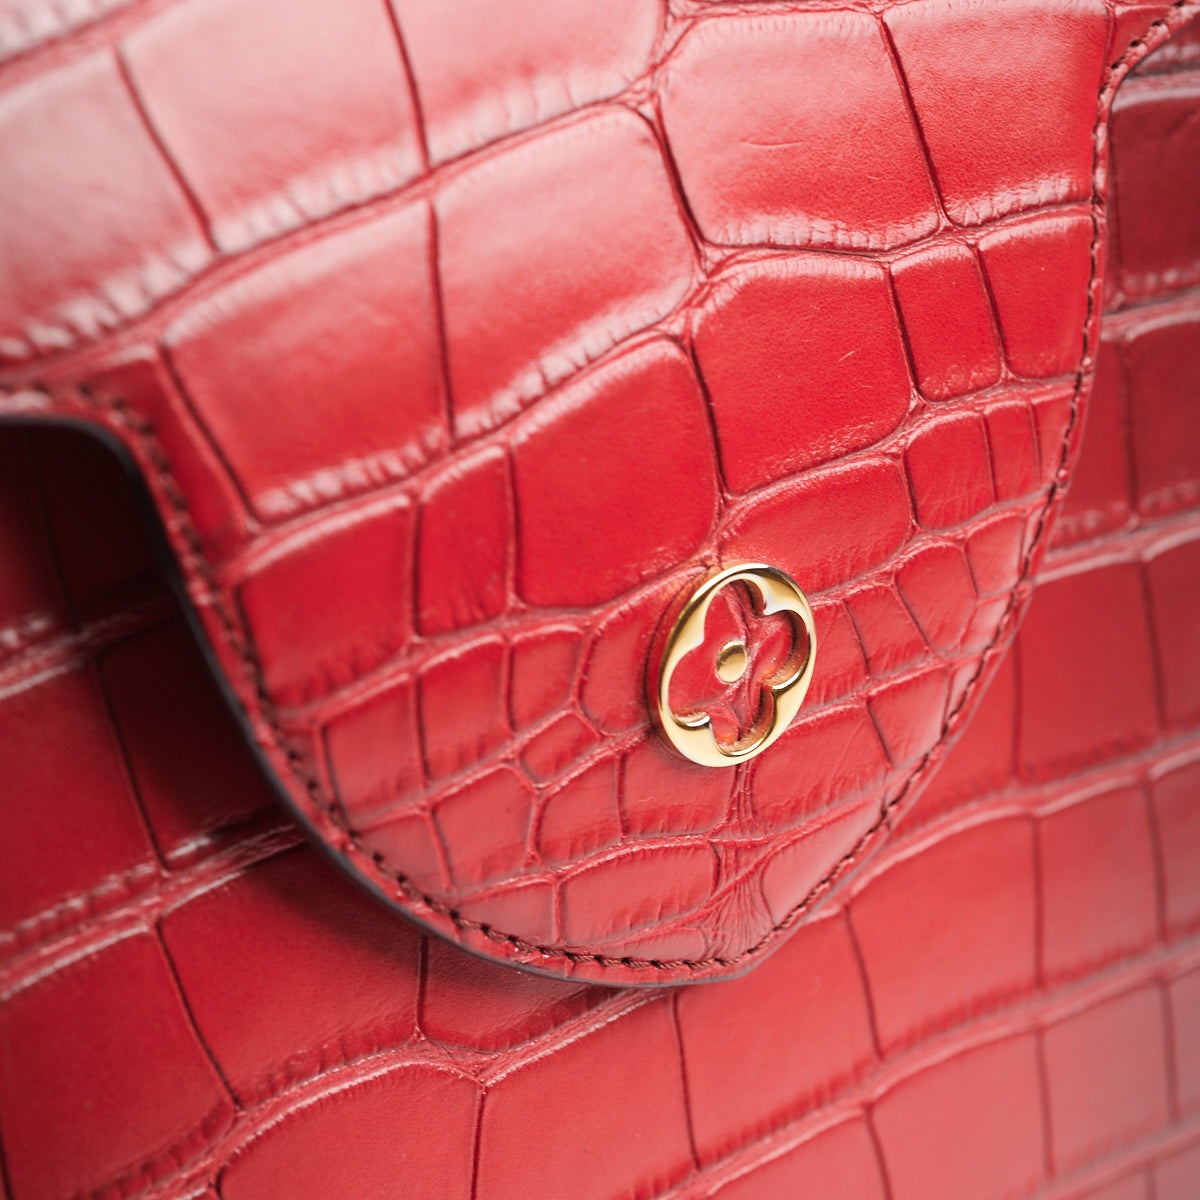 Louis Vuitton Capucines PM Bag Wildcat Crocodile Limited Edition –  Mightychic